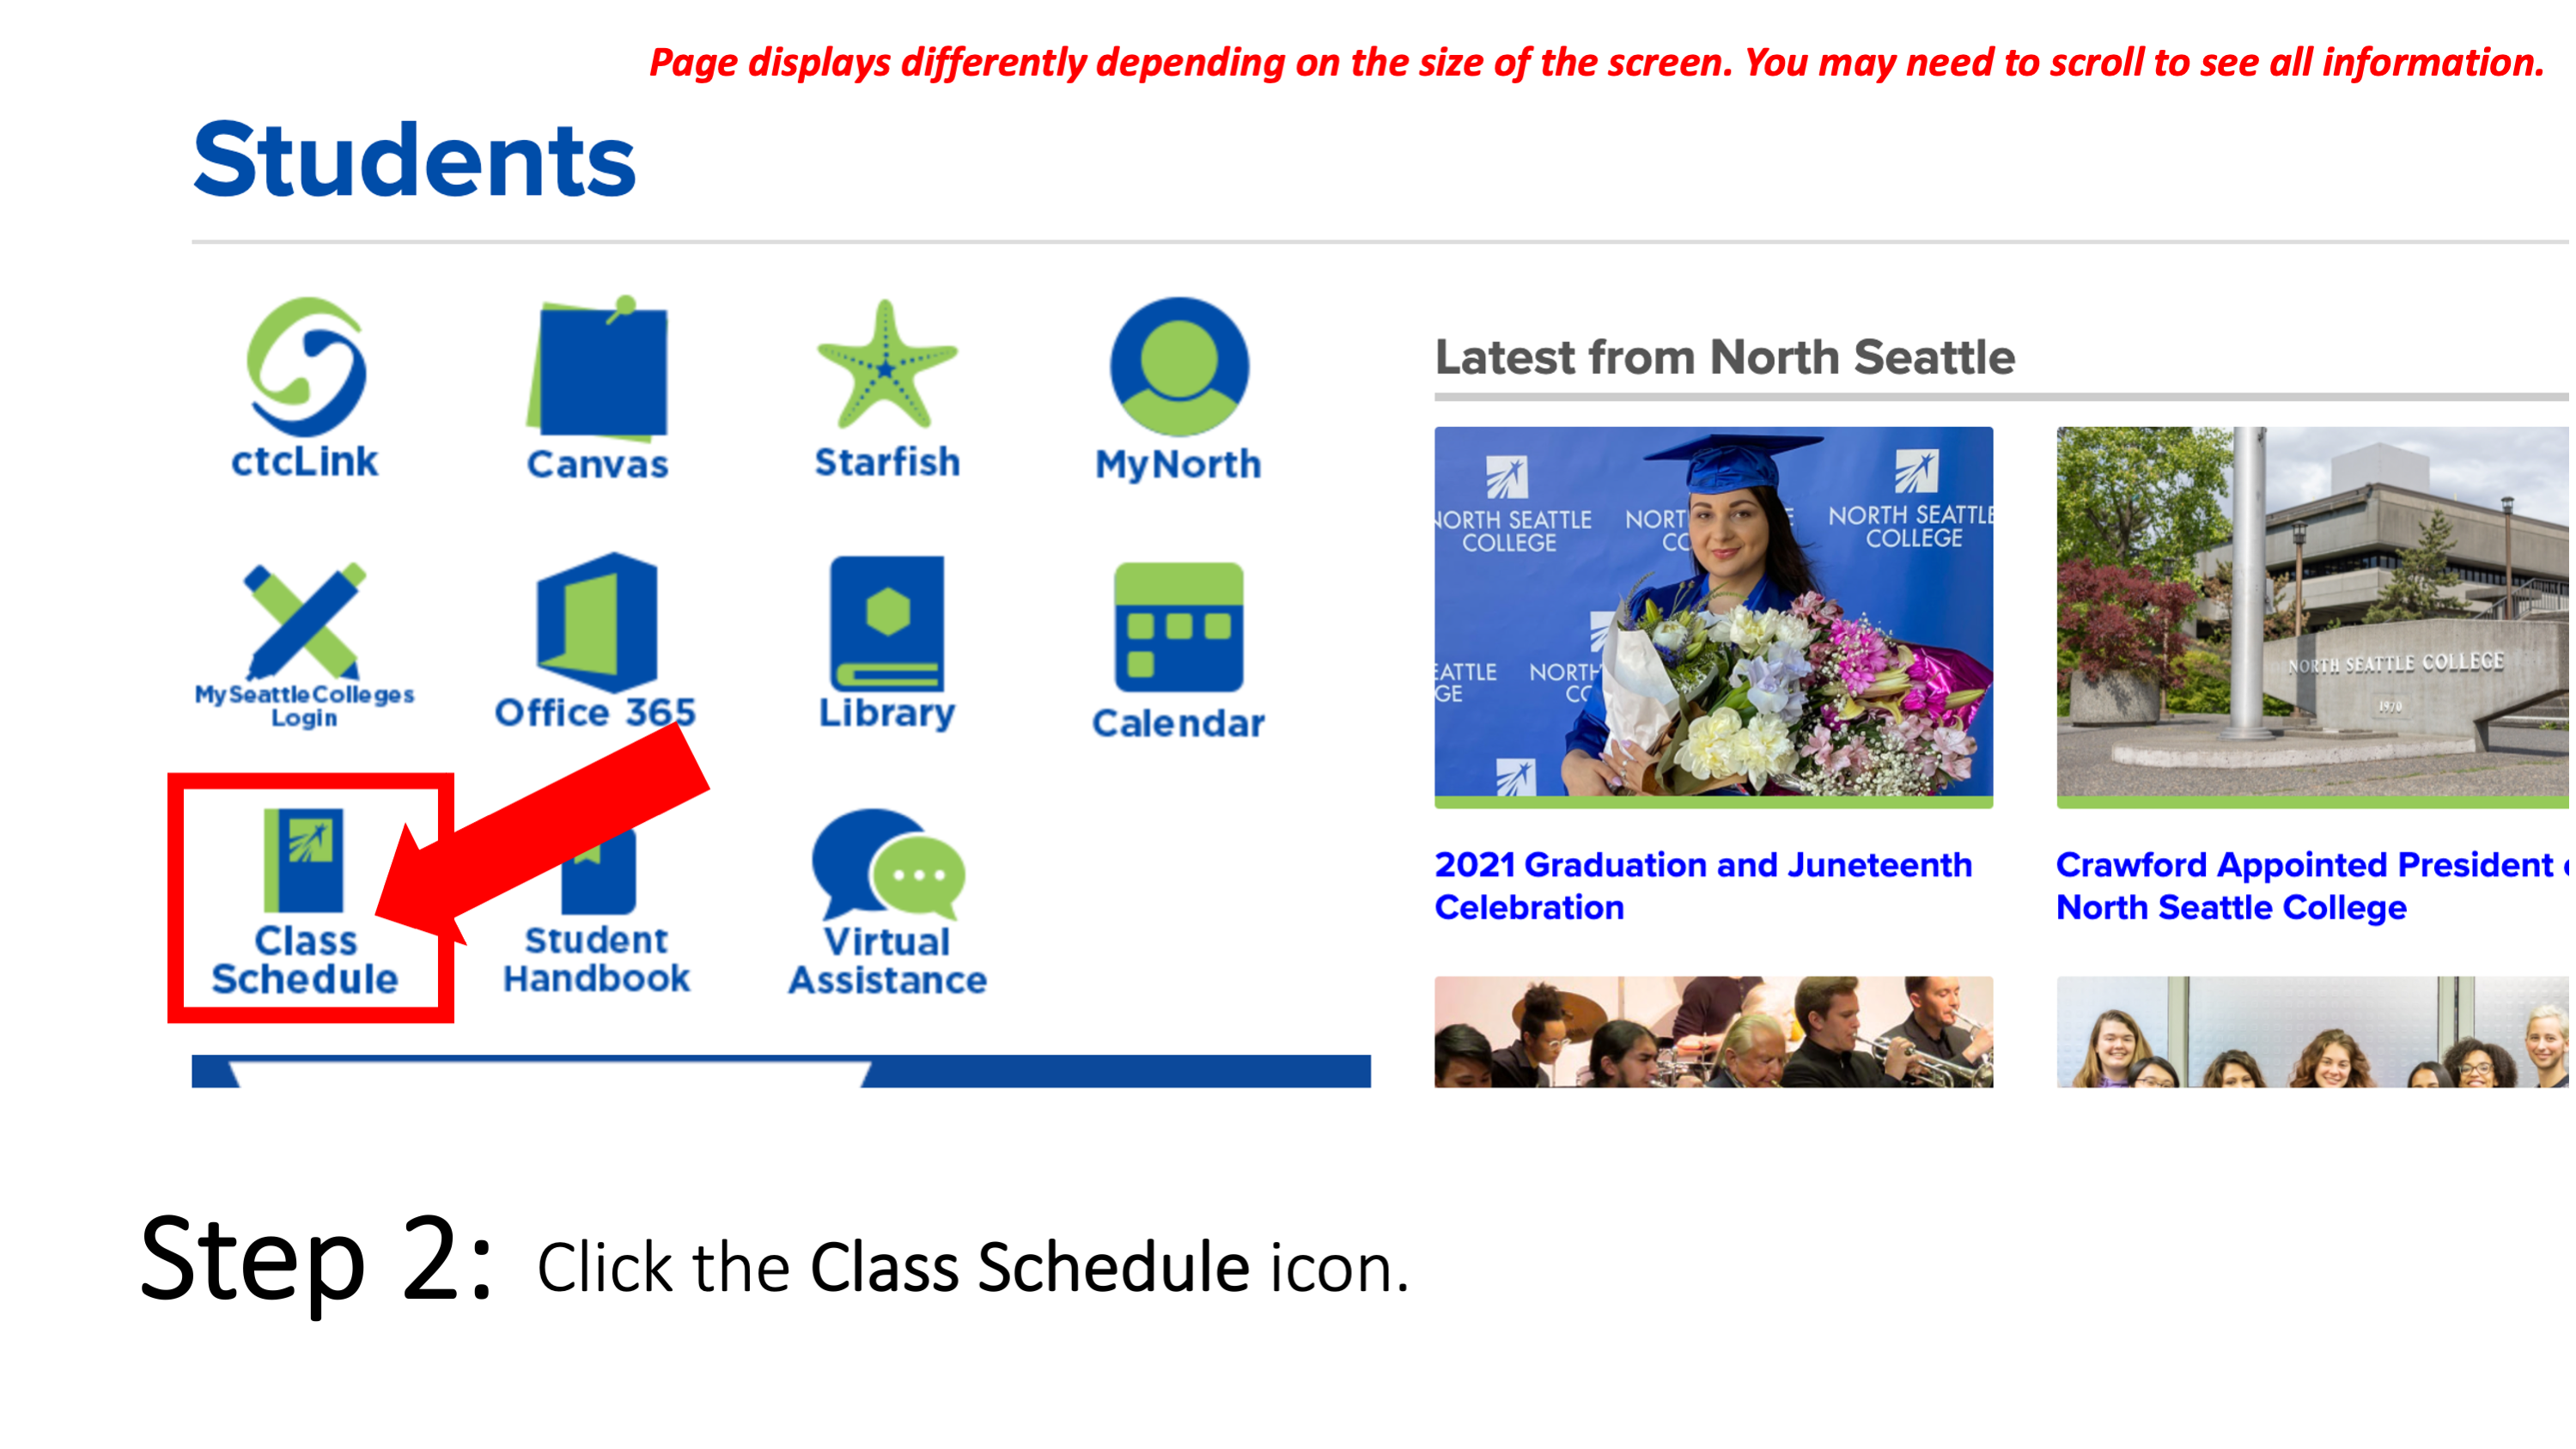 Step 2: Click on Class Schedule. Page displays differently depending on the size of the screen. You may need to scroll to see all information.